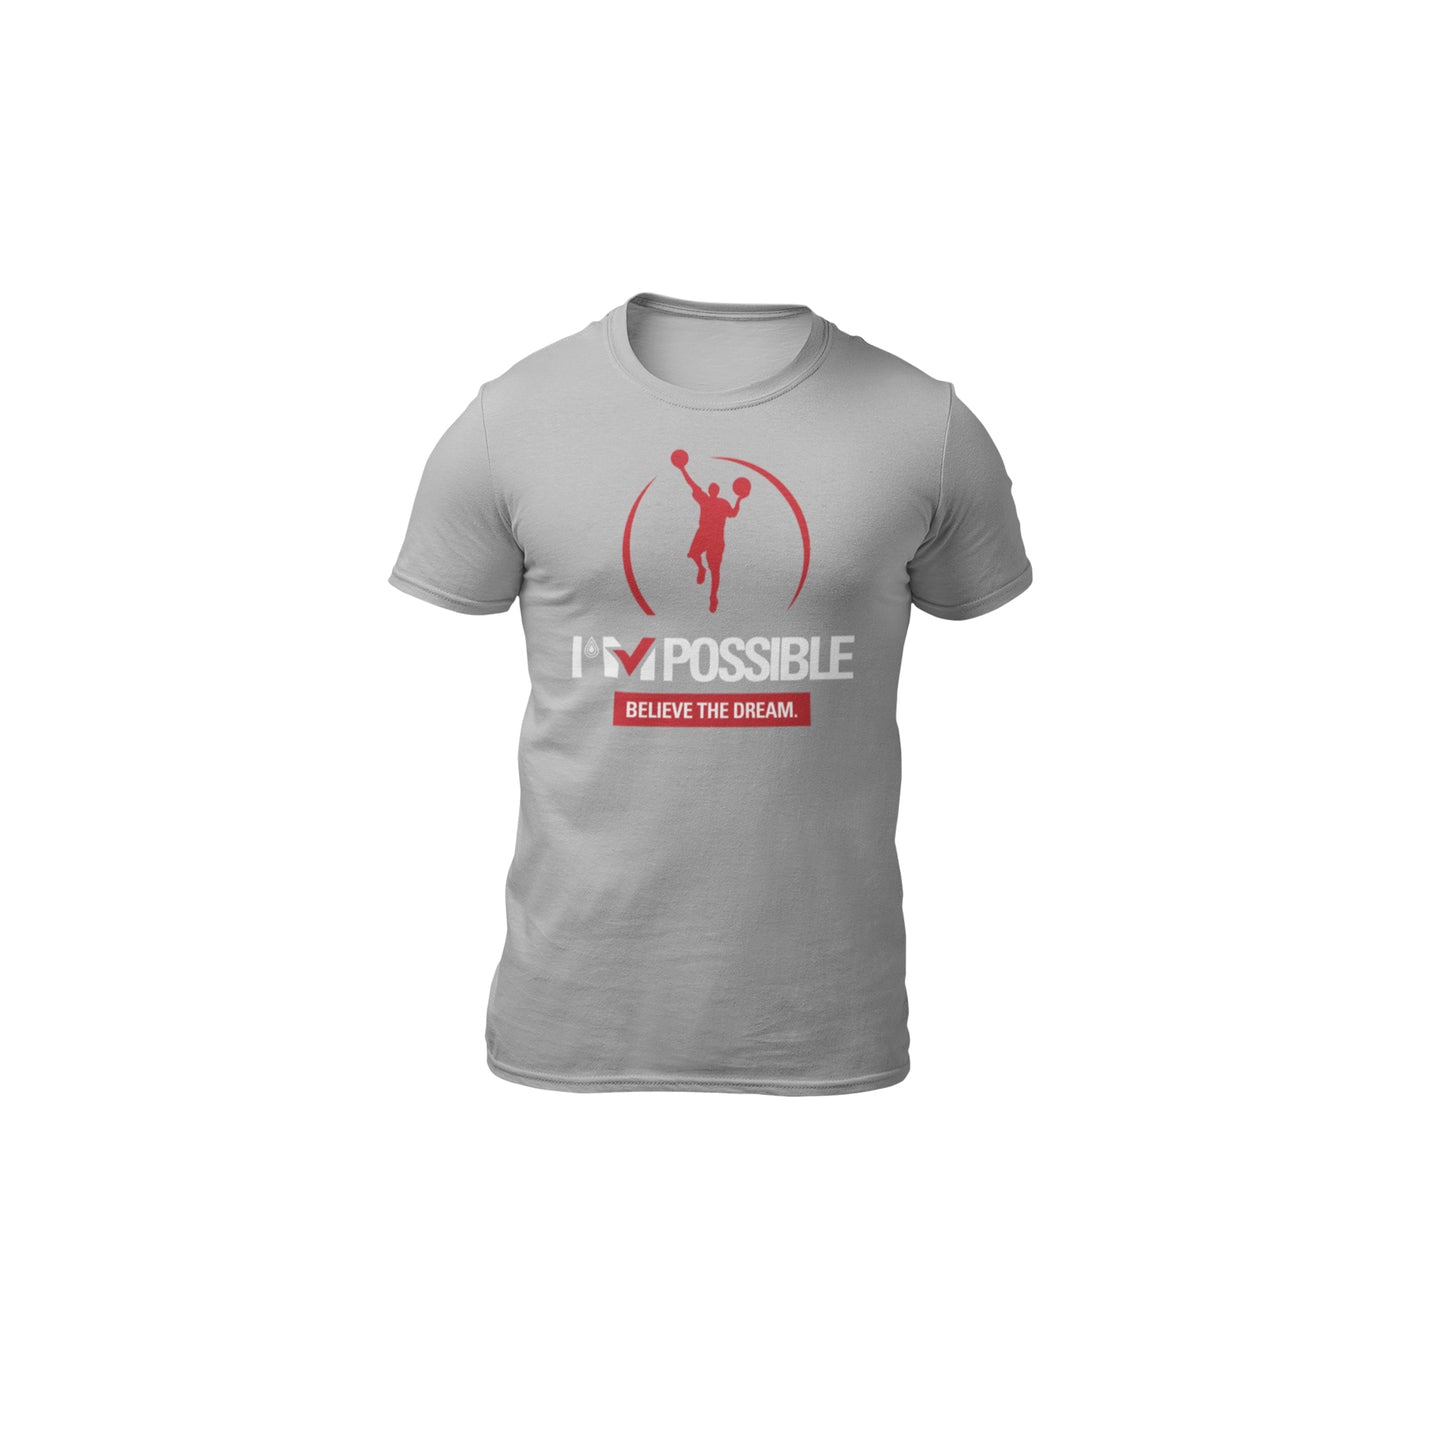 I'm Possible "Believe the Dream" T-Shirt